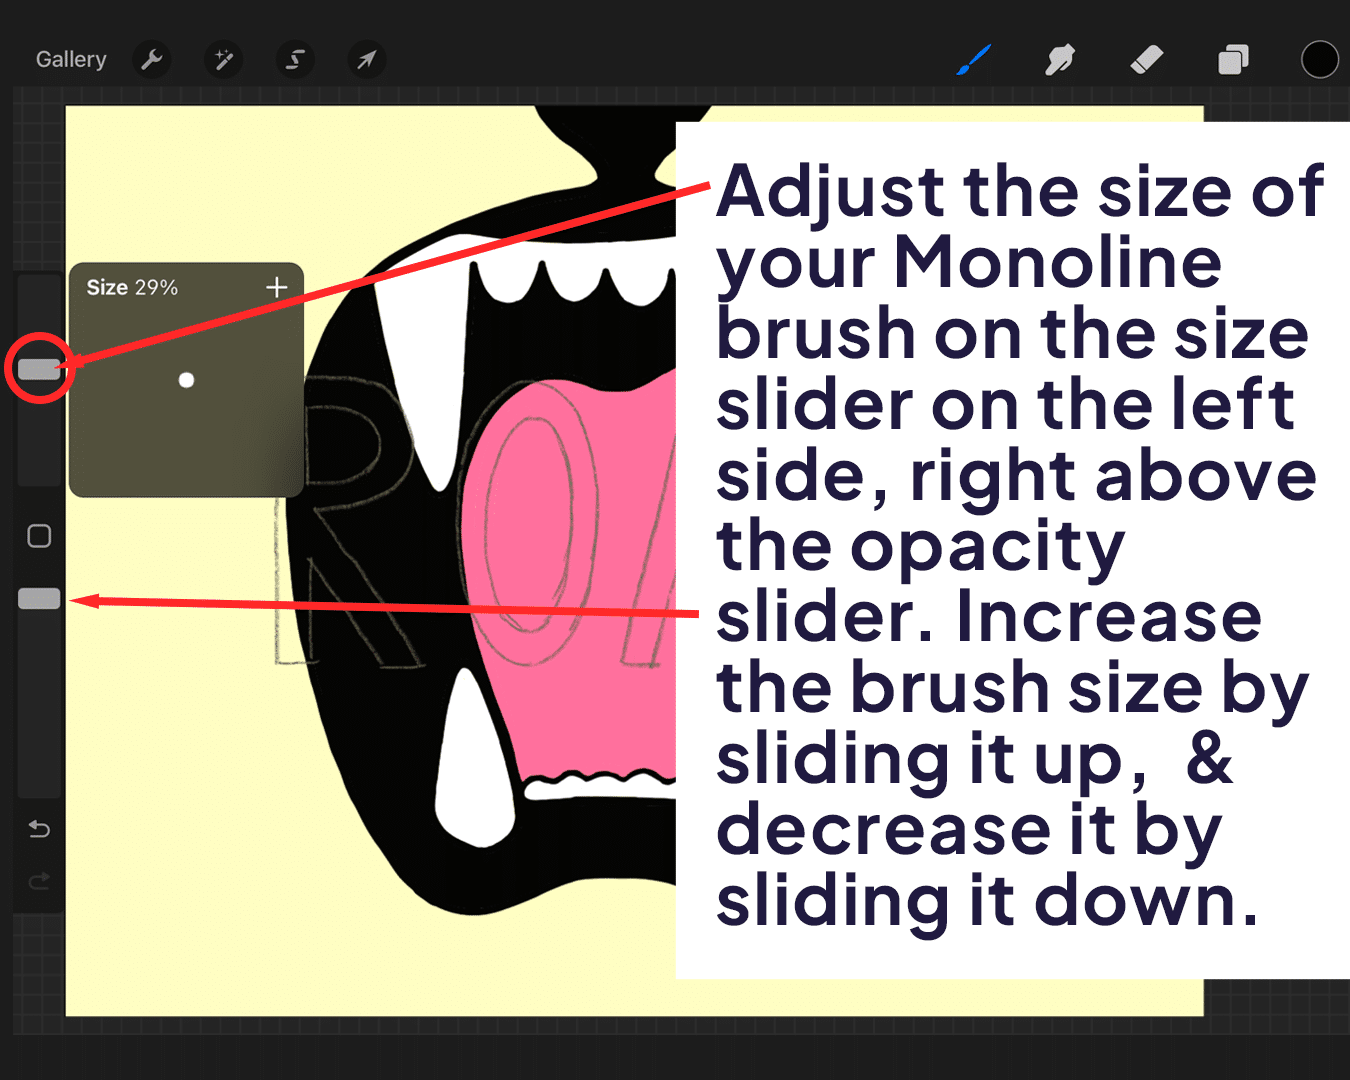 How to adjust the size on your Monoline brush